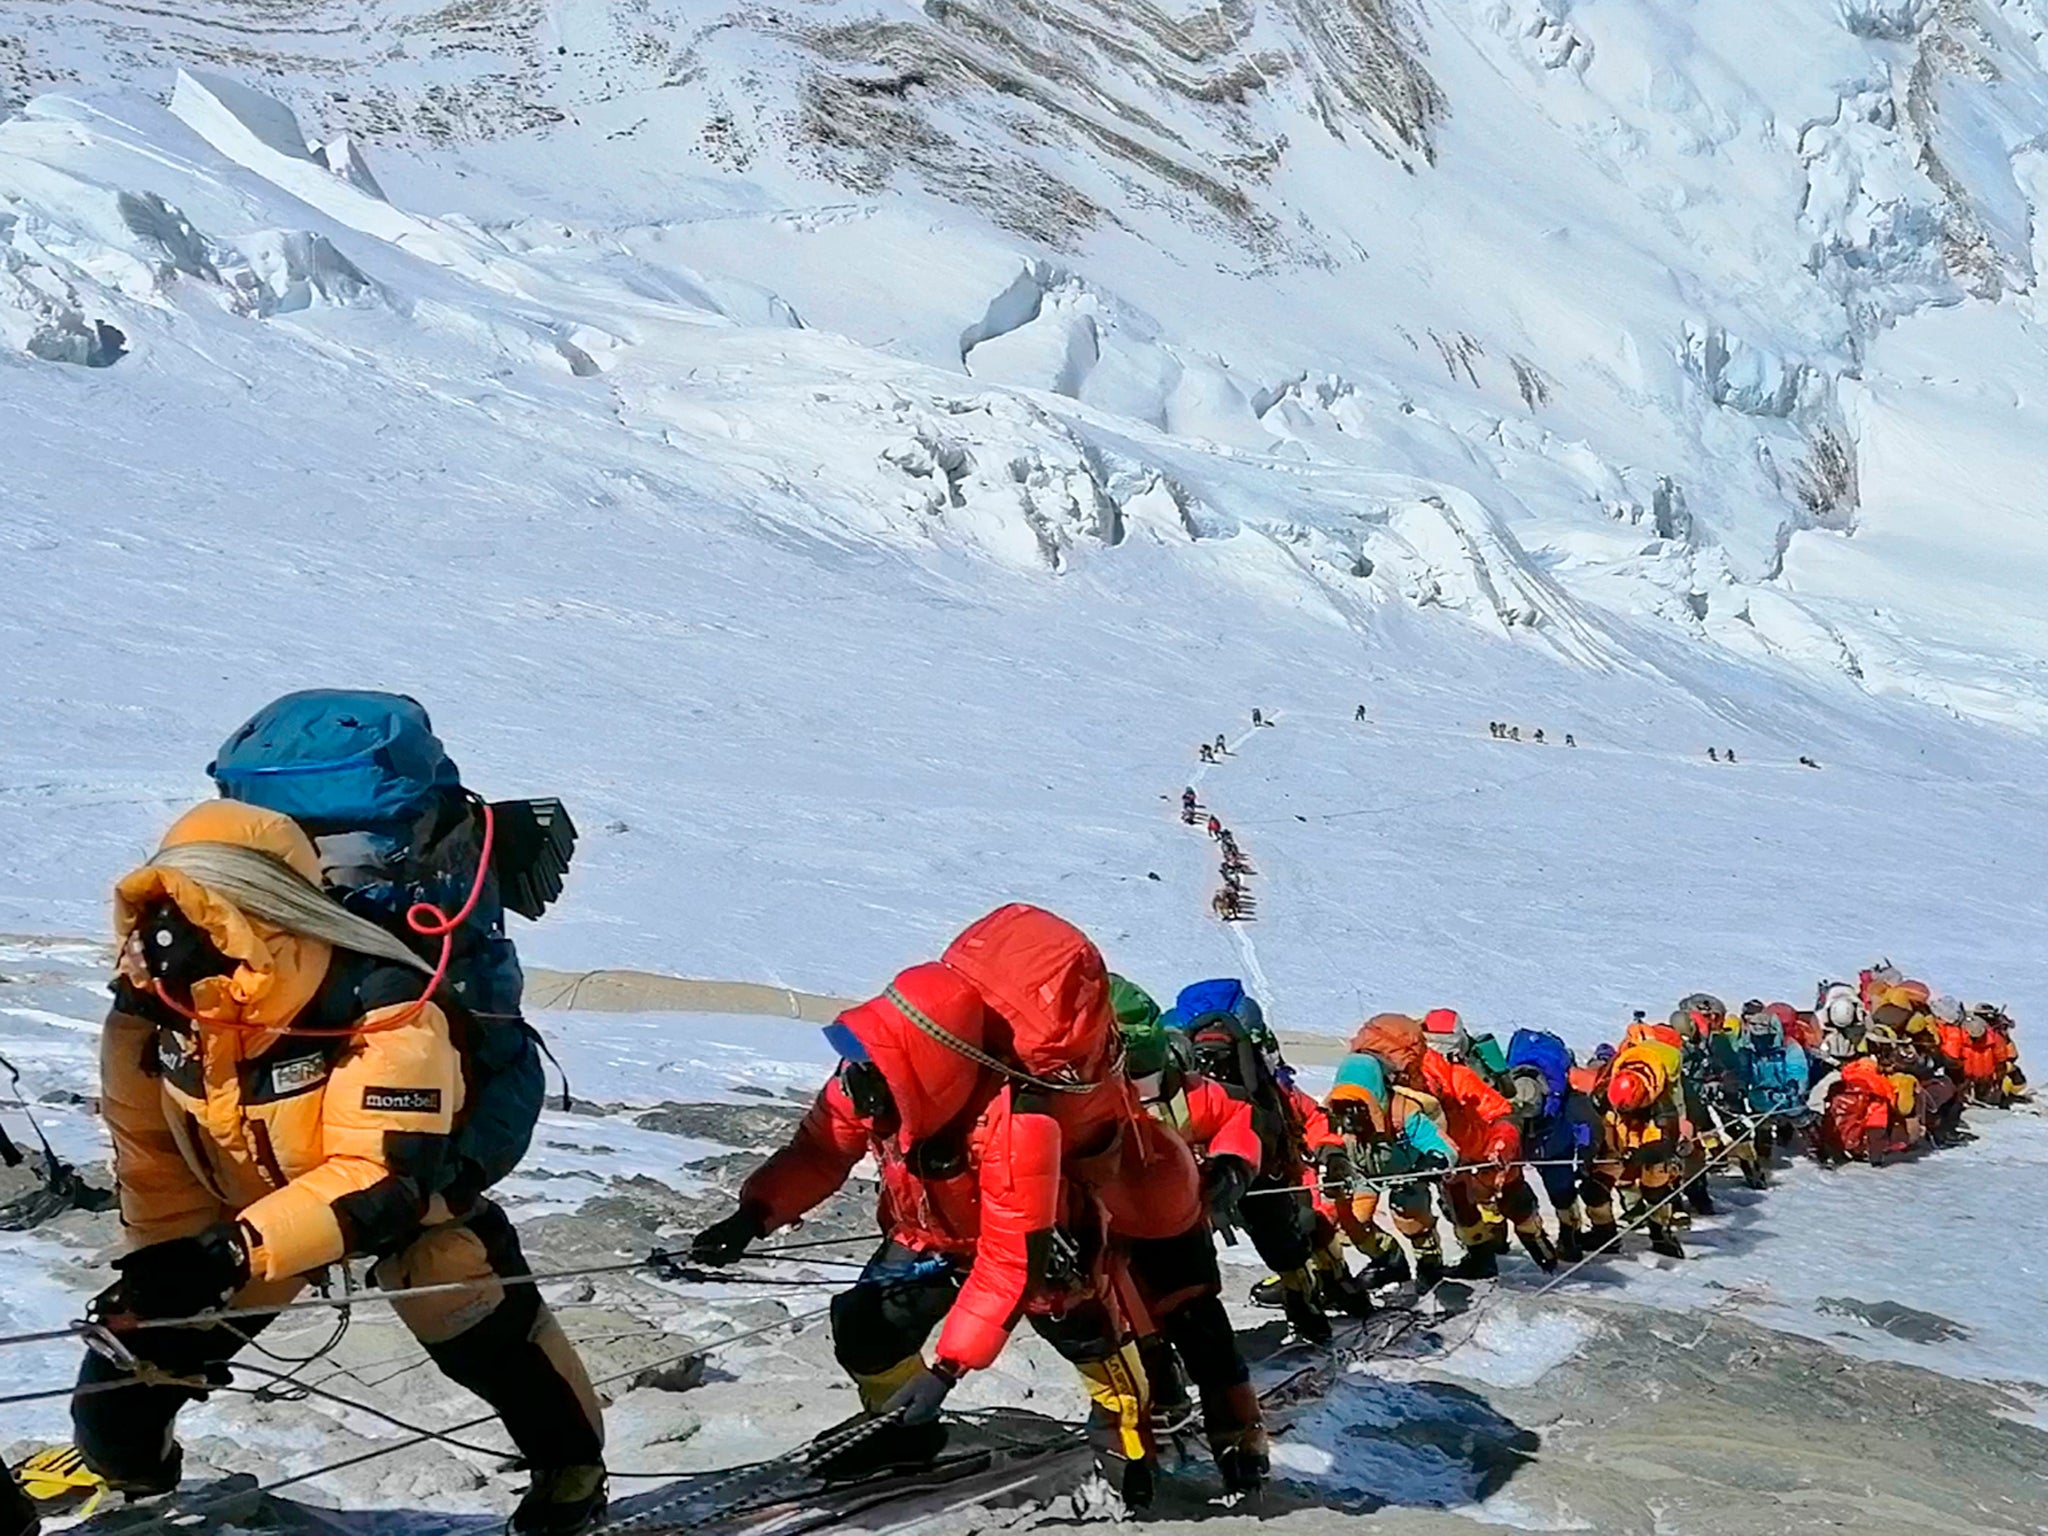 A long queue of mountain climbers line a path on Mount Everest